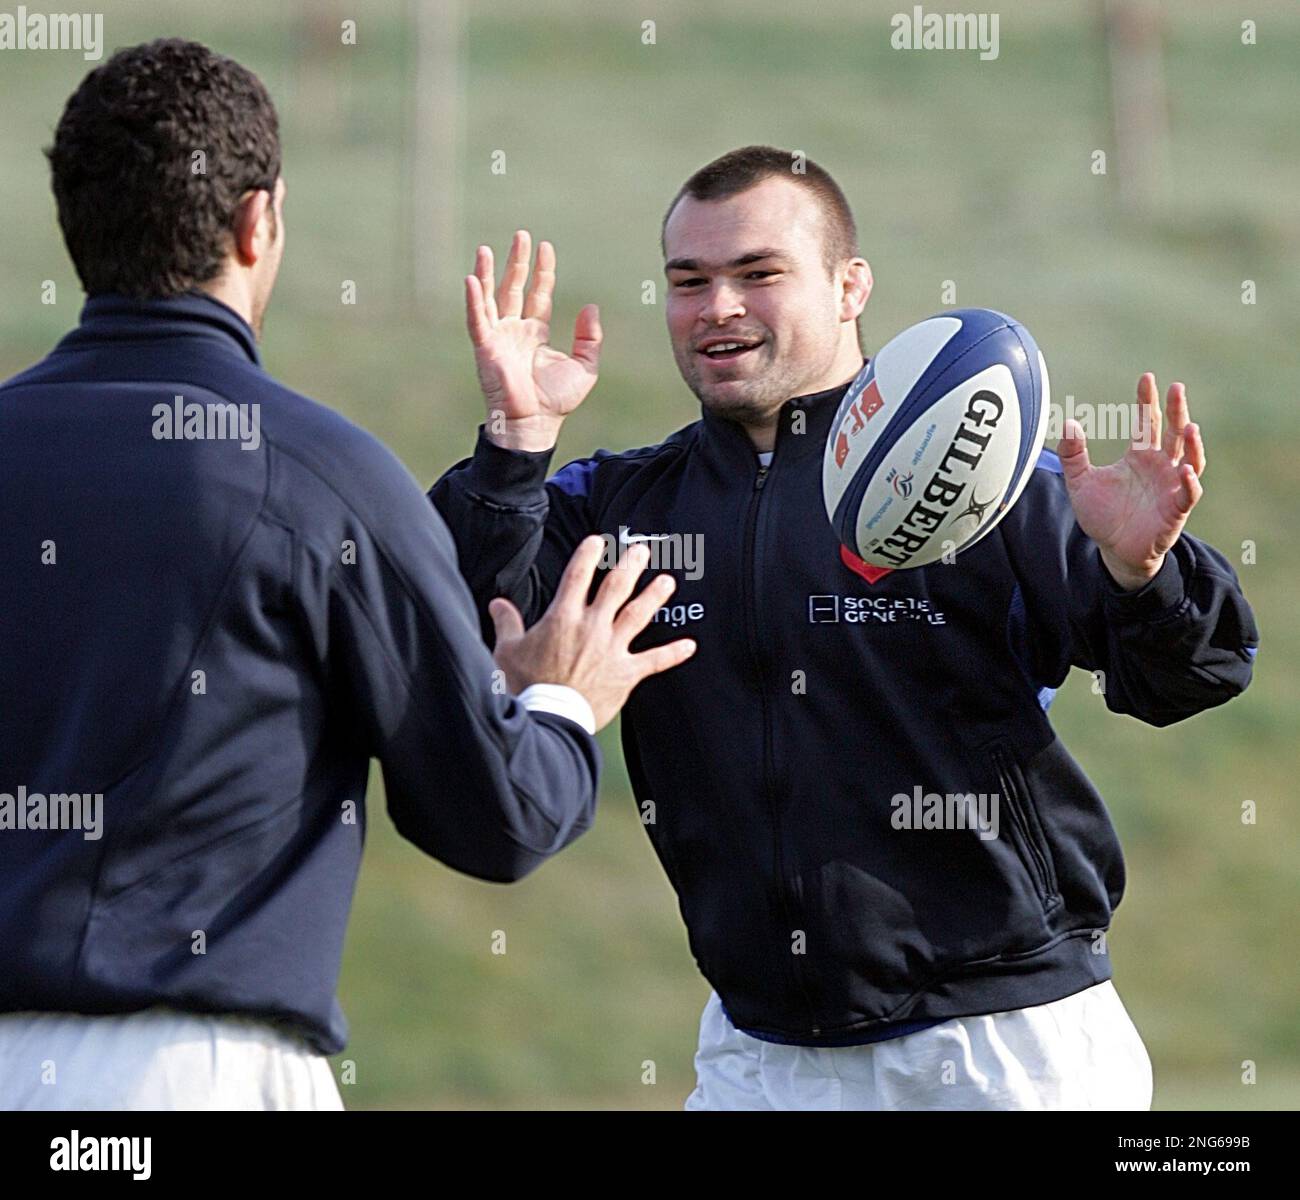 French national rugby team player Nicolas Mas throws the ball during a  training session in Marcoussis, south of Paris, Tuesday Feb. 20, 2007.  France will play against Wales next Saturday in Saint